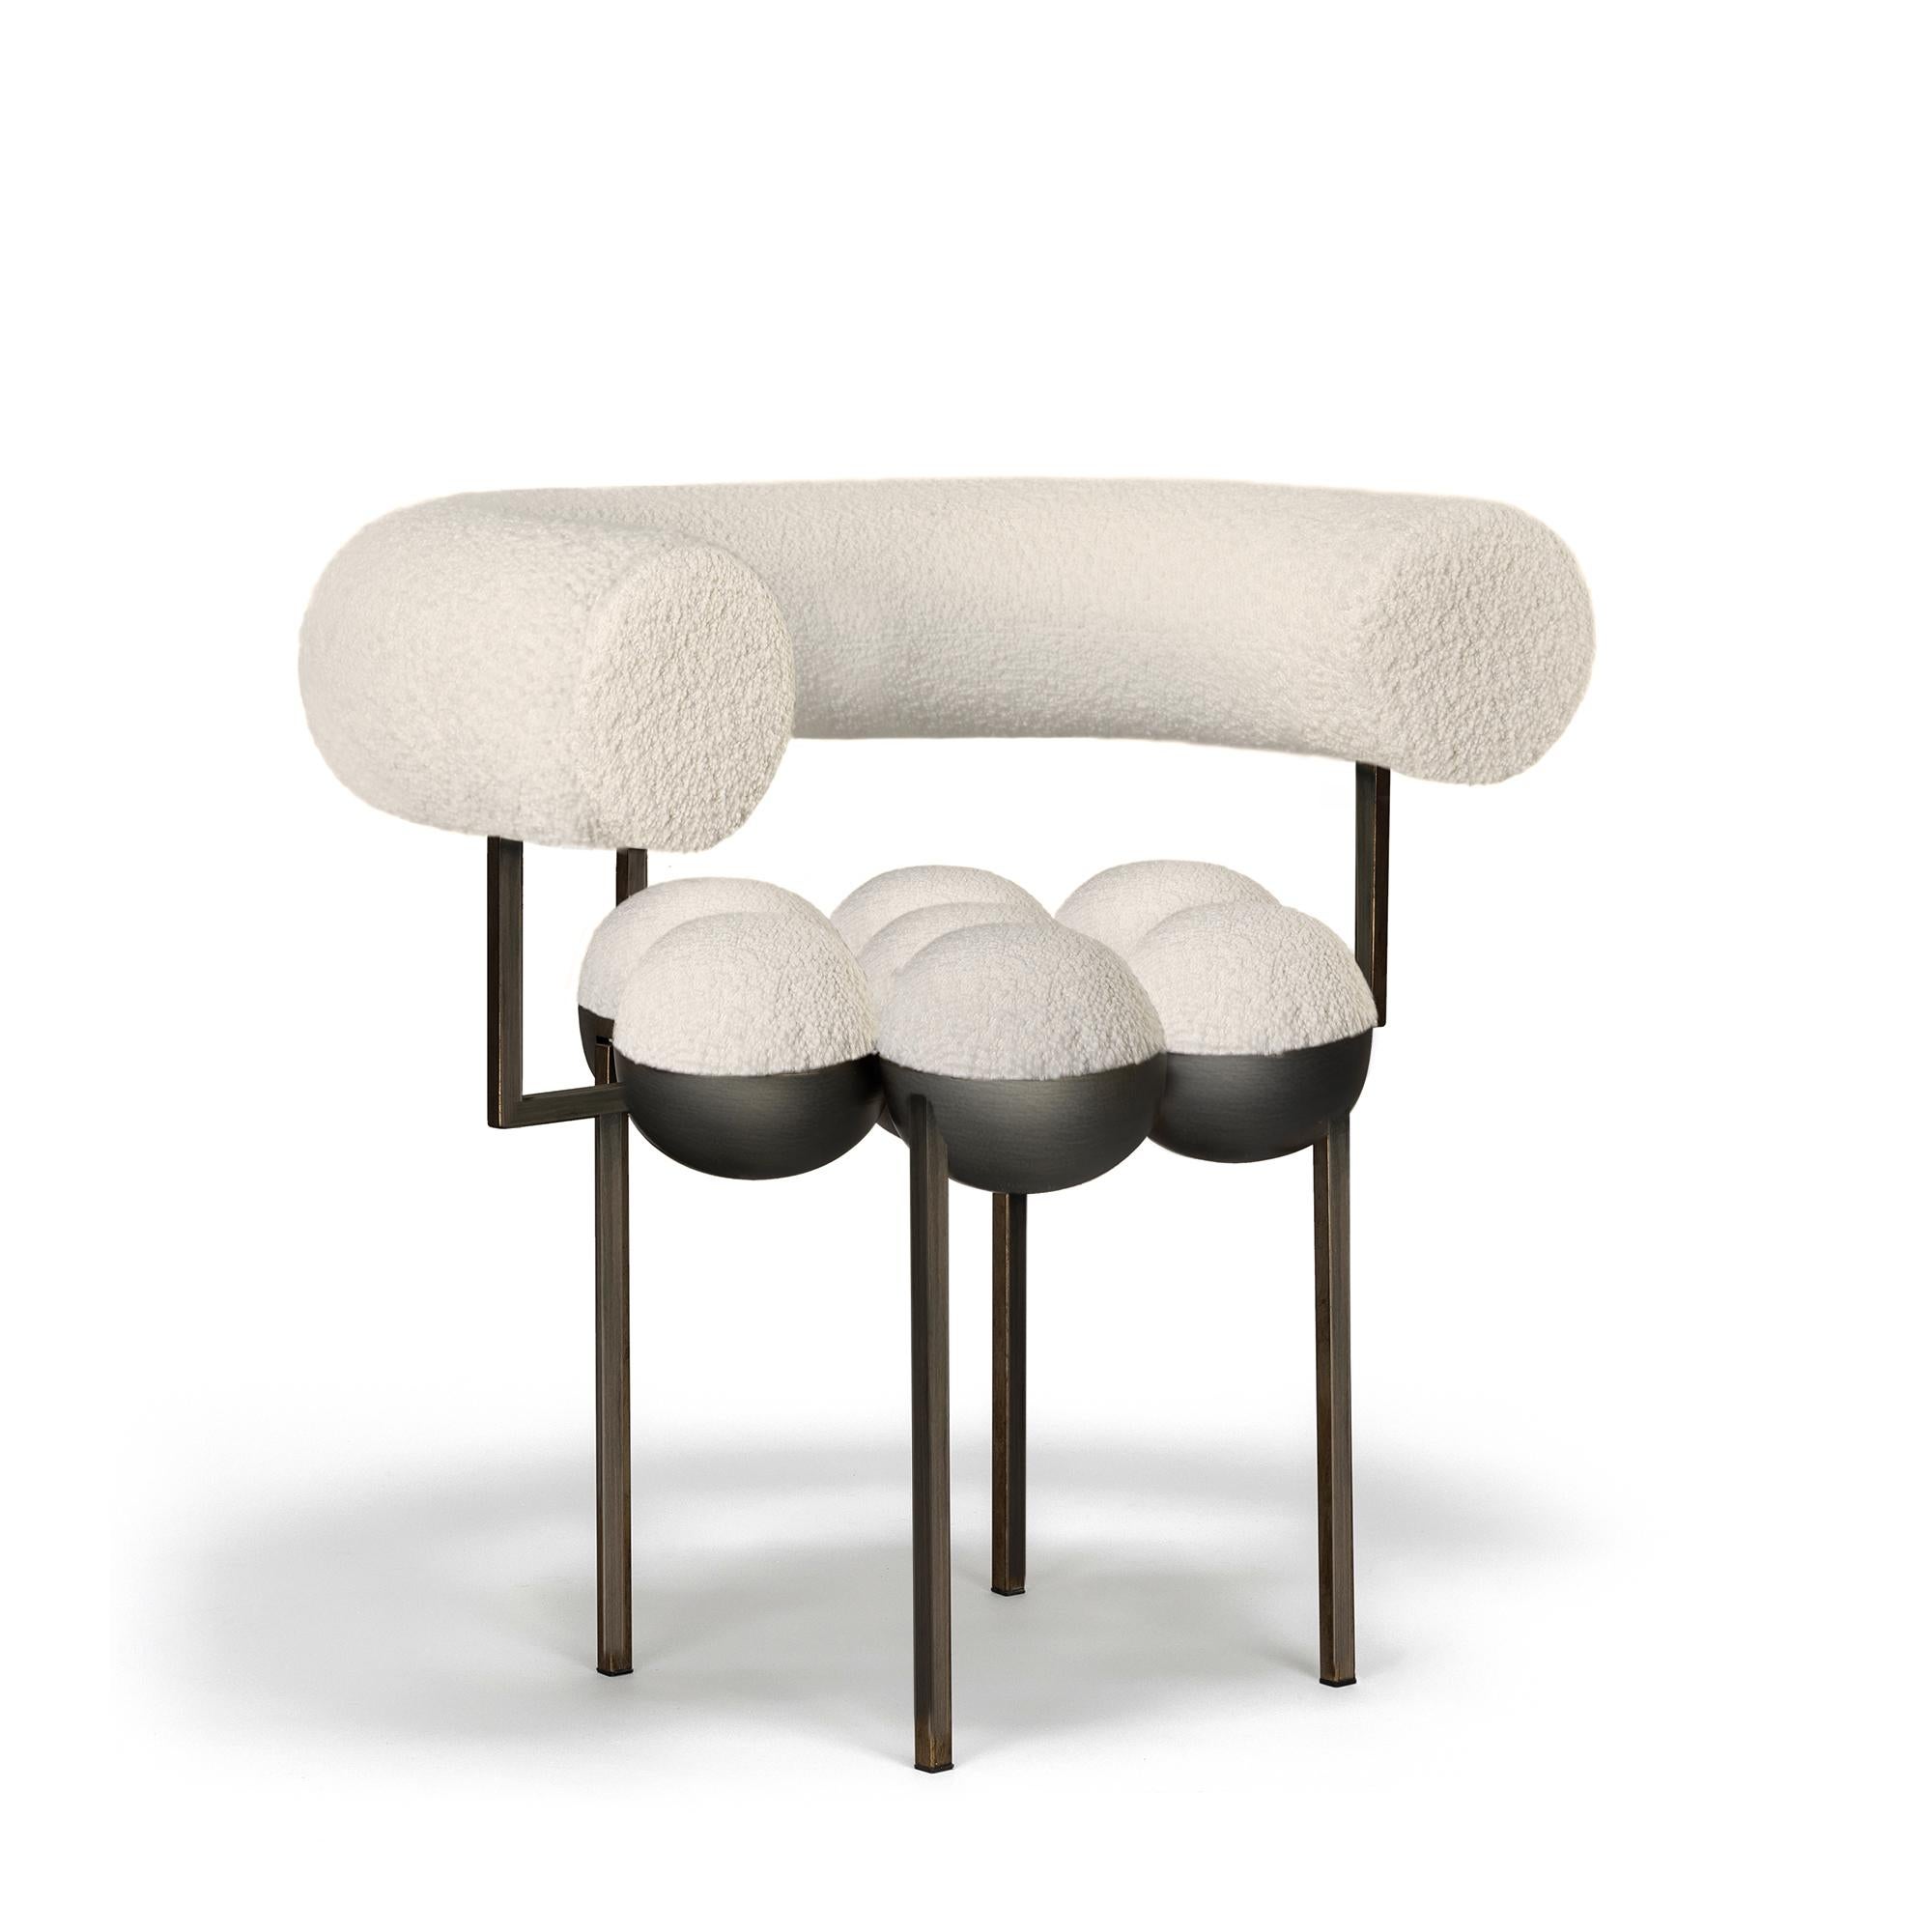 The distinctive Saturn chair is a return to the split sphere concepts Bohinc originally created for her jewelry collections such as Sun and Moon (2007) and Solaris (2012). This form has now been evolved to create bilboquet style ball and cup